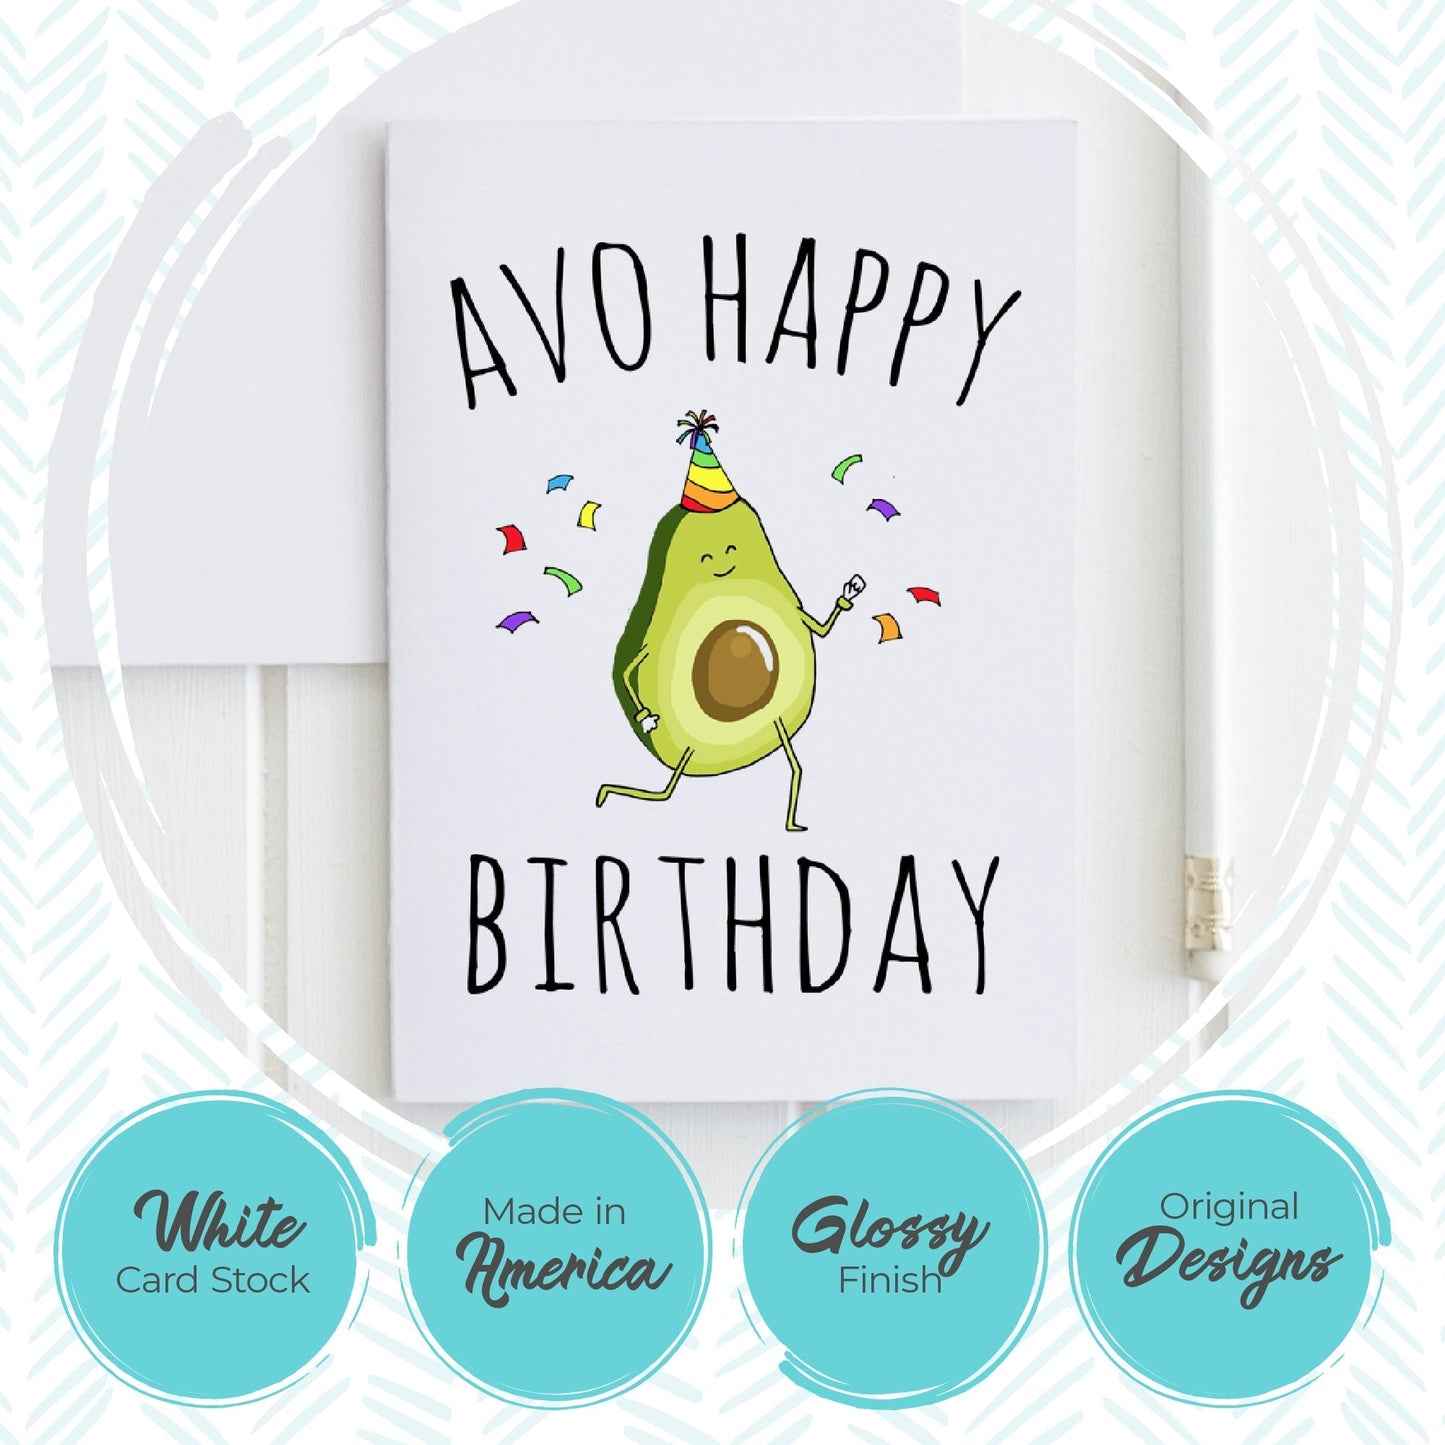 Congrats On That Really Great Thing You Did! - Greeting Card - MoonlightMakers